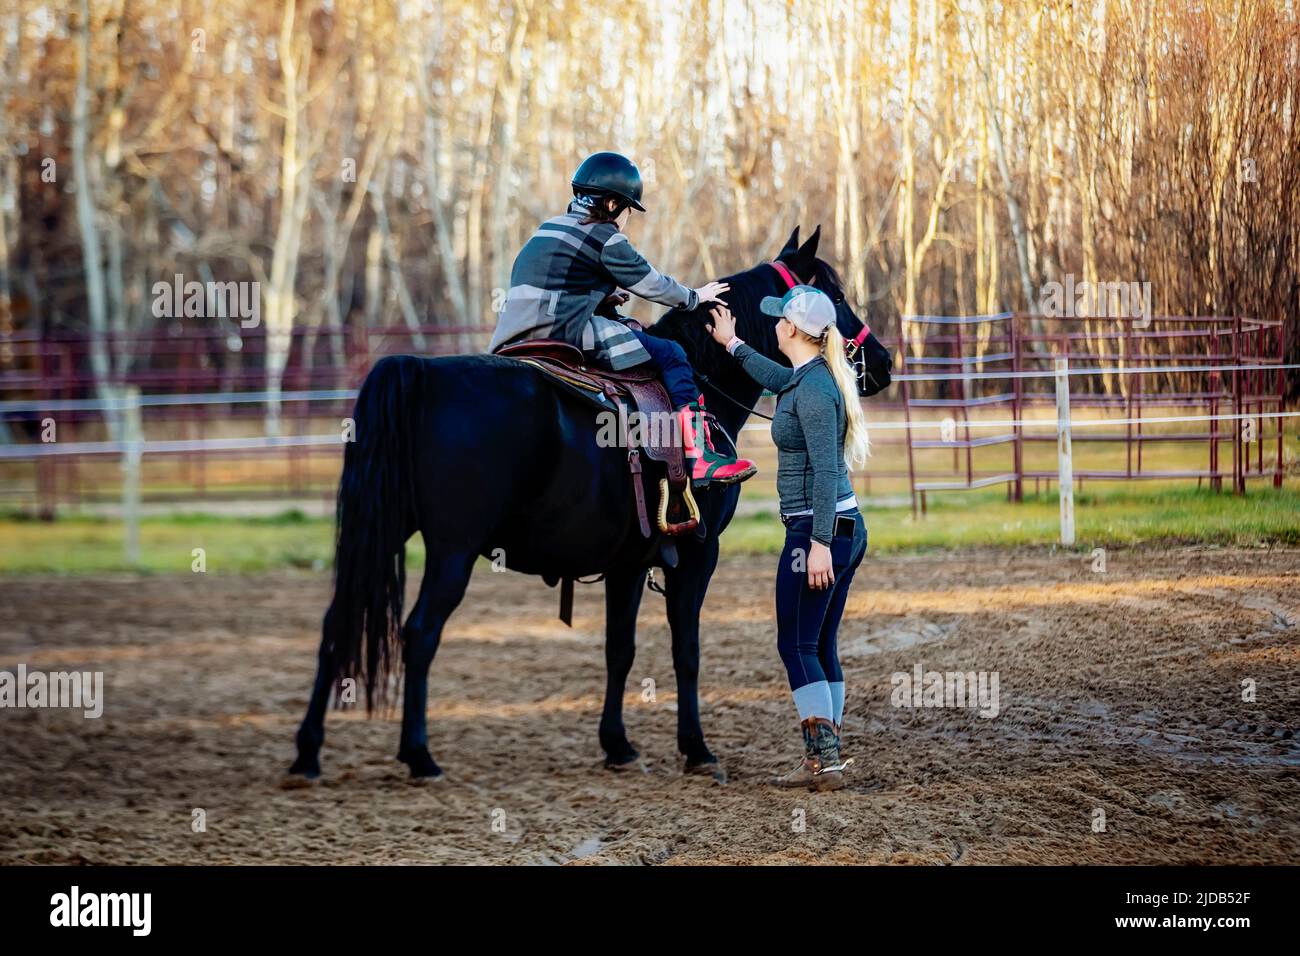 A trainer working with a young girl with Cerebral Palsy during a Hippotherapy session; Westlock, Alberta, Canada Stock Photo